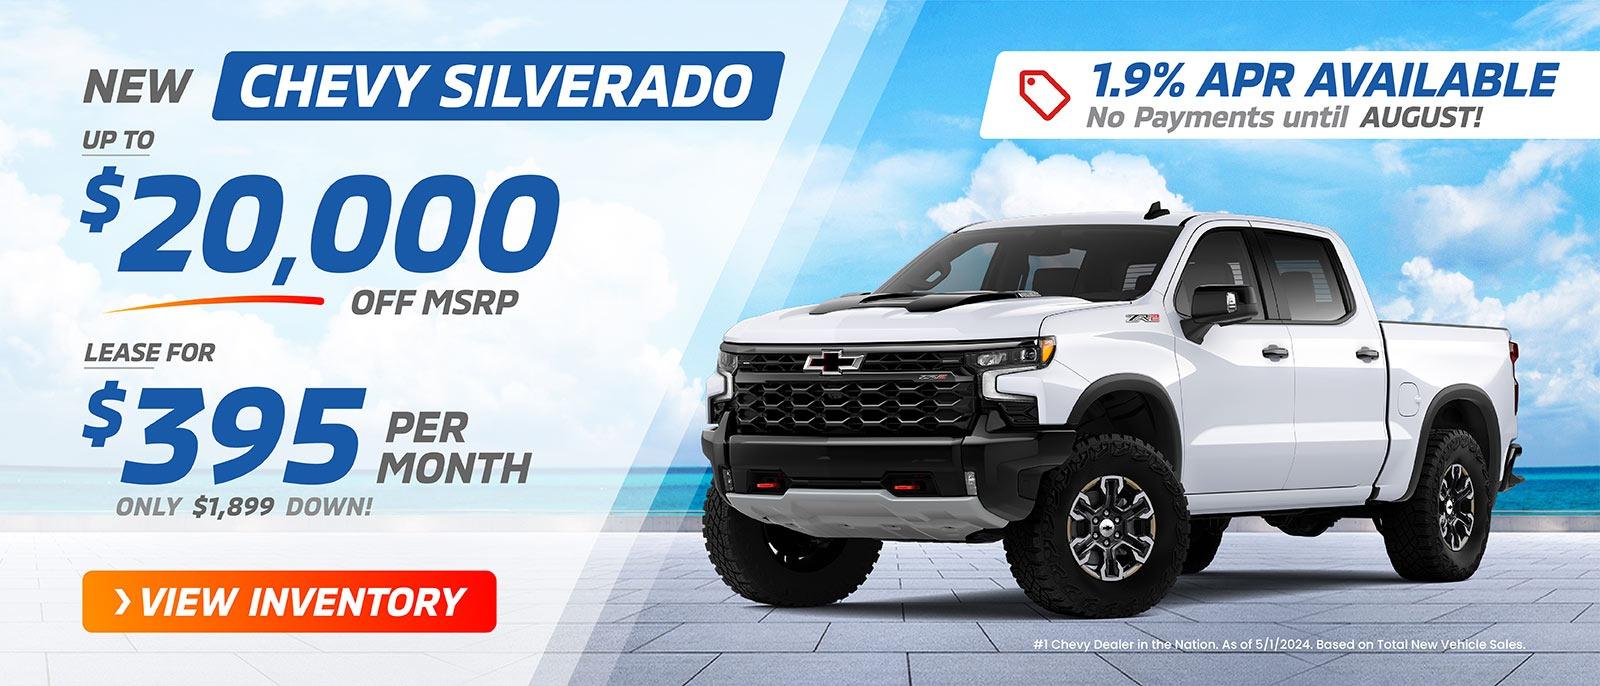 New Chevy Silverado
UP TO $19,000 OFF MSRP
OR Lease for as low as $395 per month w/ $1,899 down